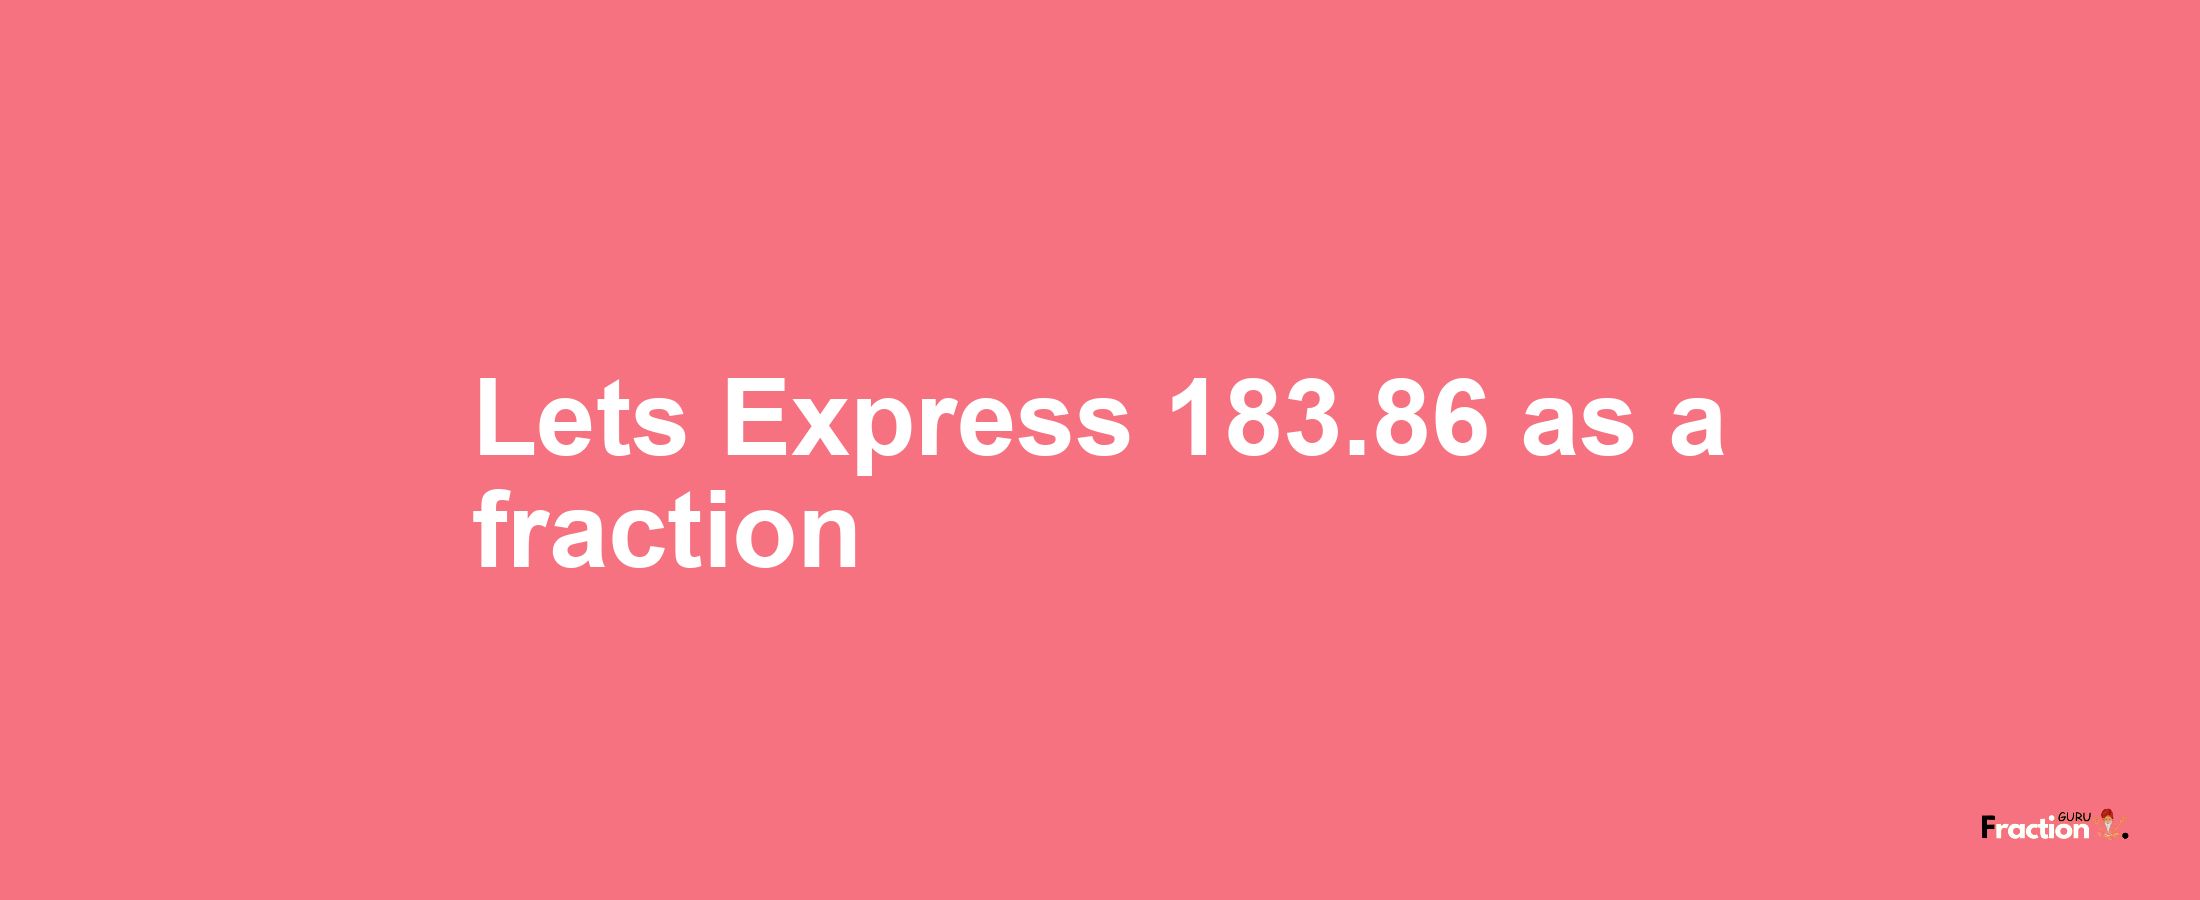 Lets Express 183.86 as afraction